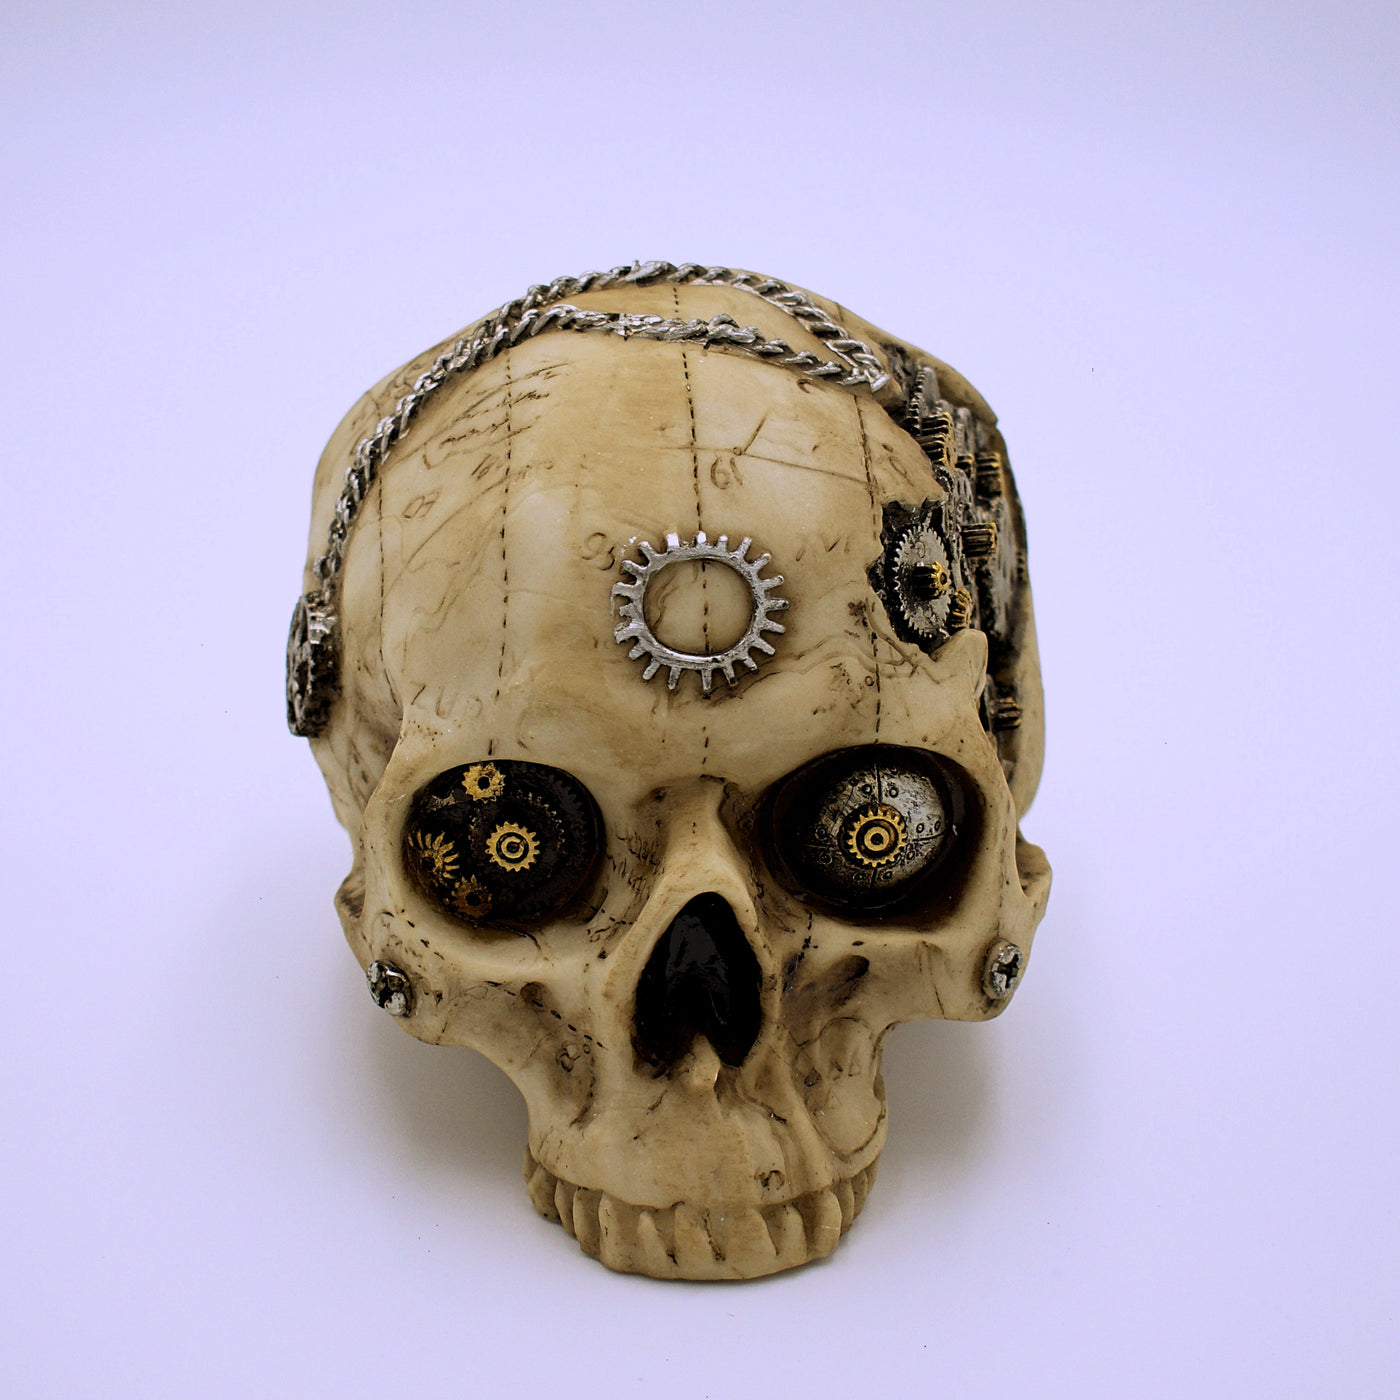 Steampunk Gears Skull Sculpture - The Cranio Collections